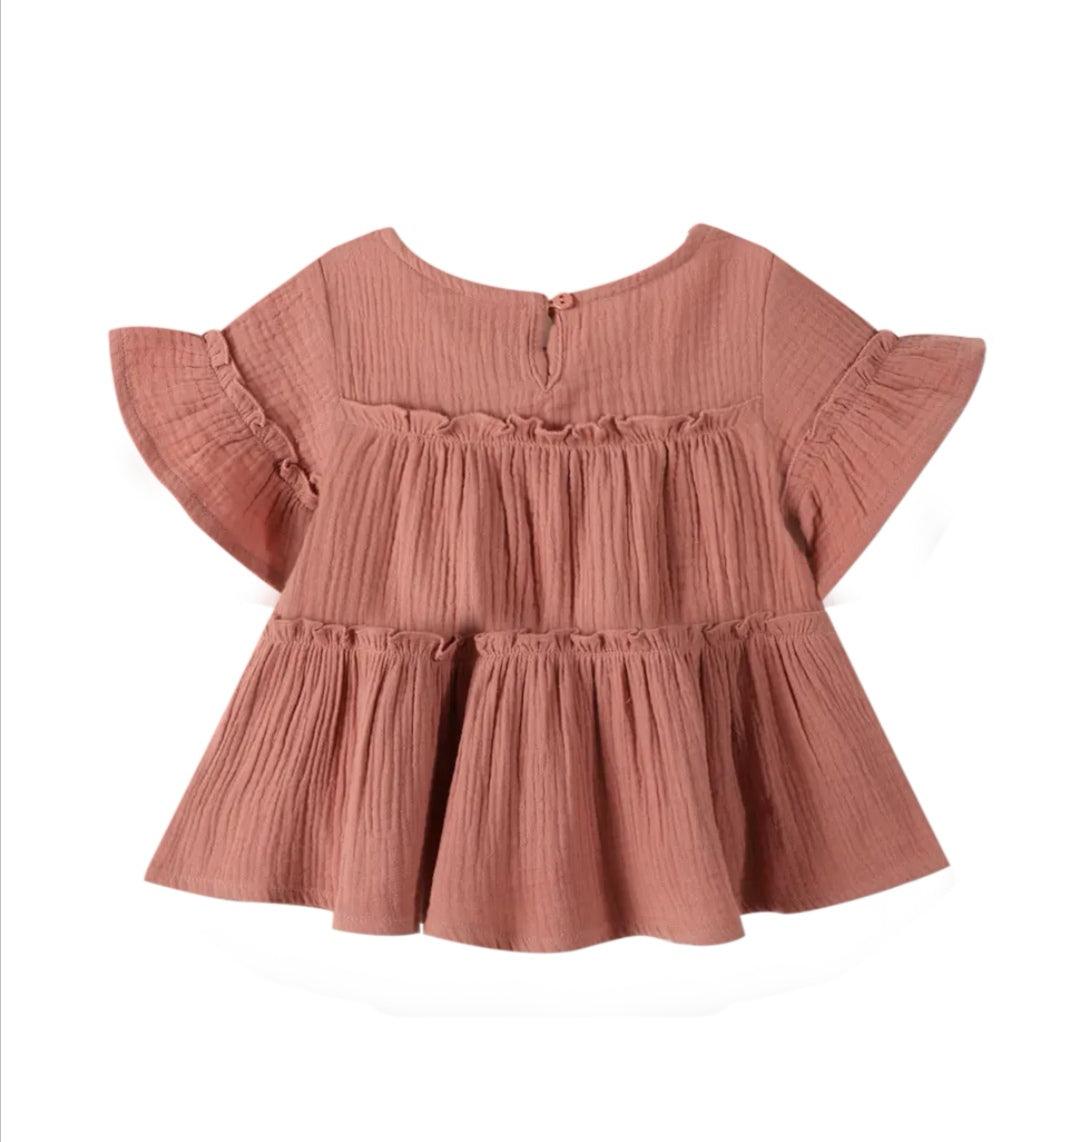 Indi Flare Sleeve Top - DUSTY PINK